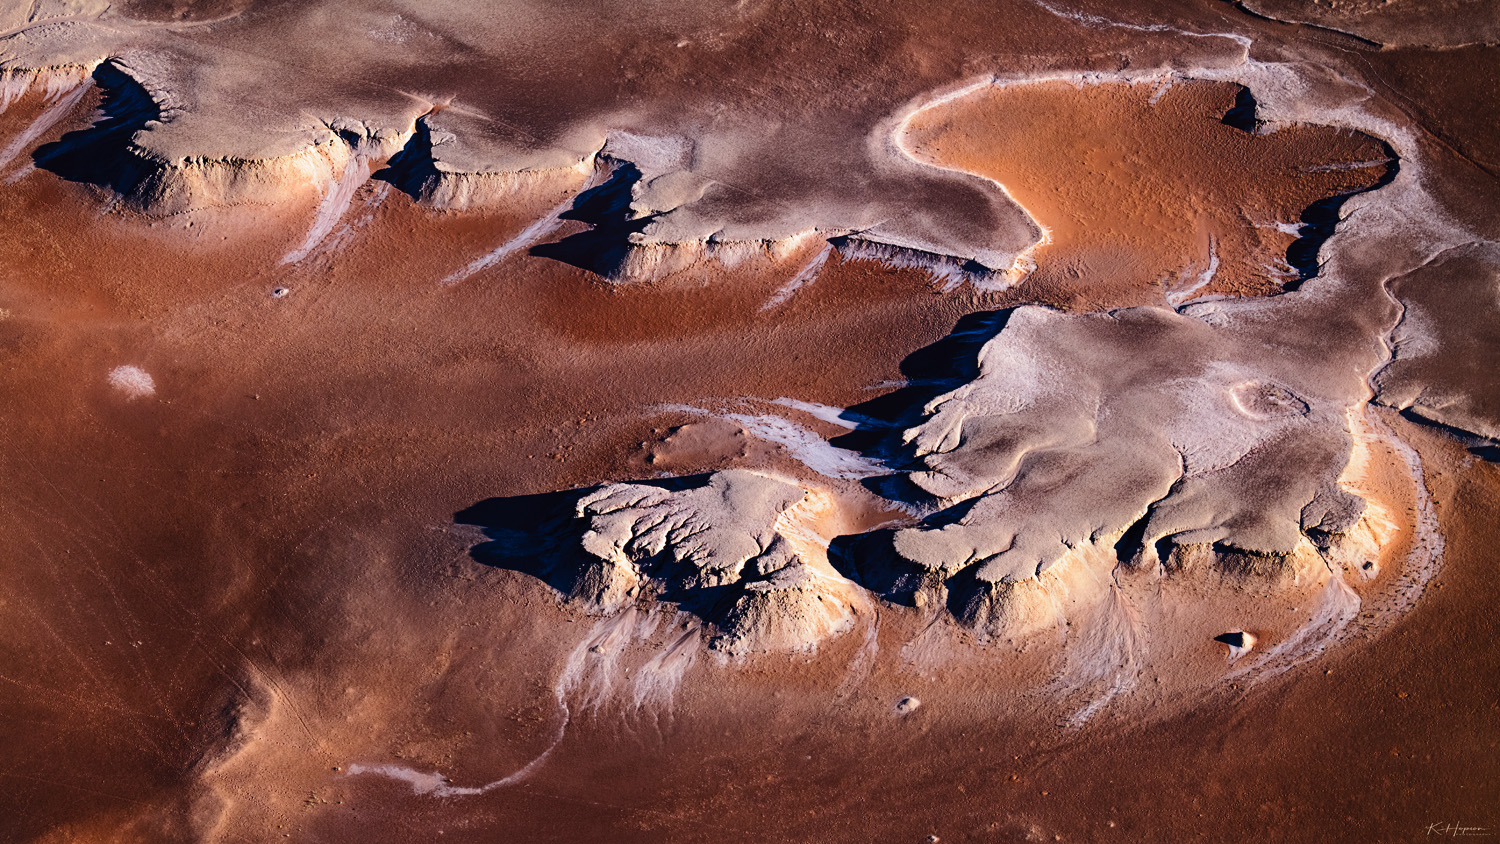 Animal tracks in the desert neat salted cliffs in the namibian desert as seen from the air